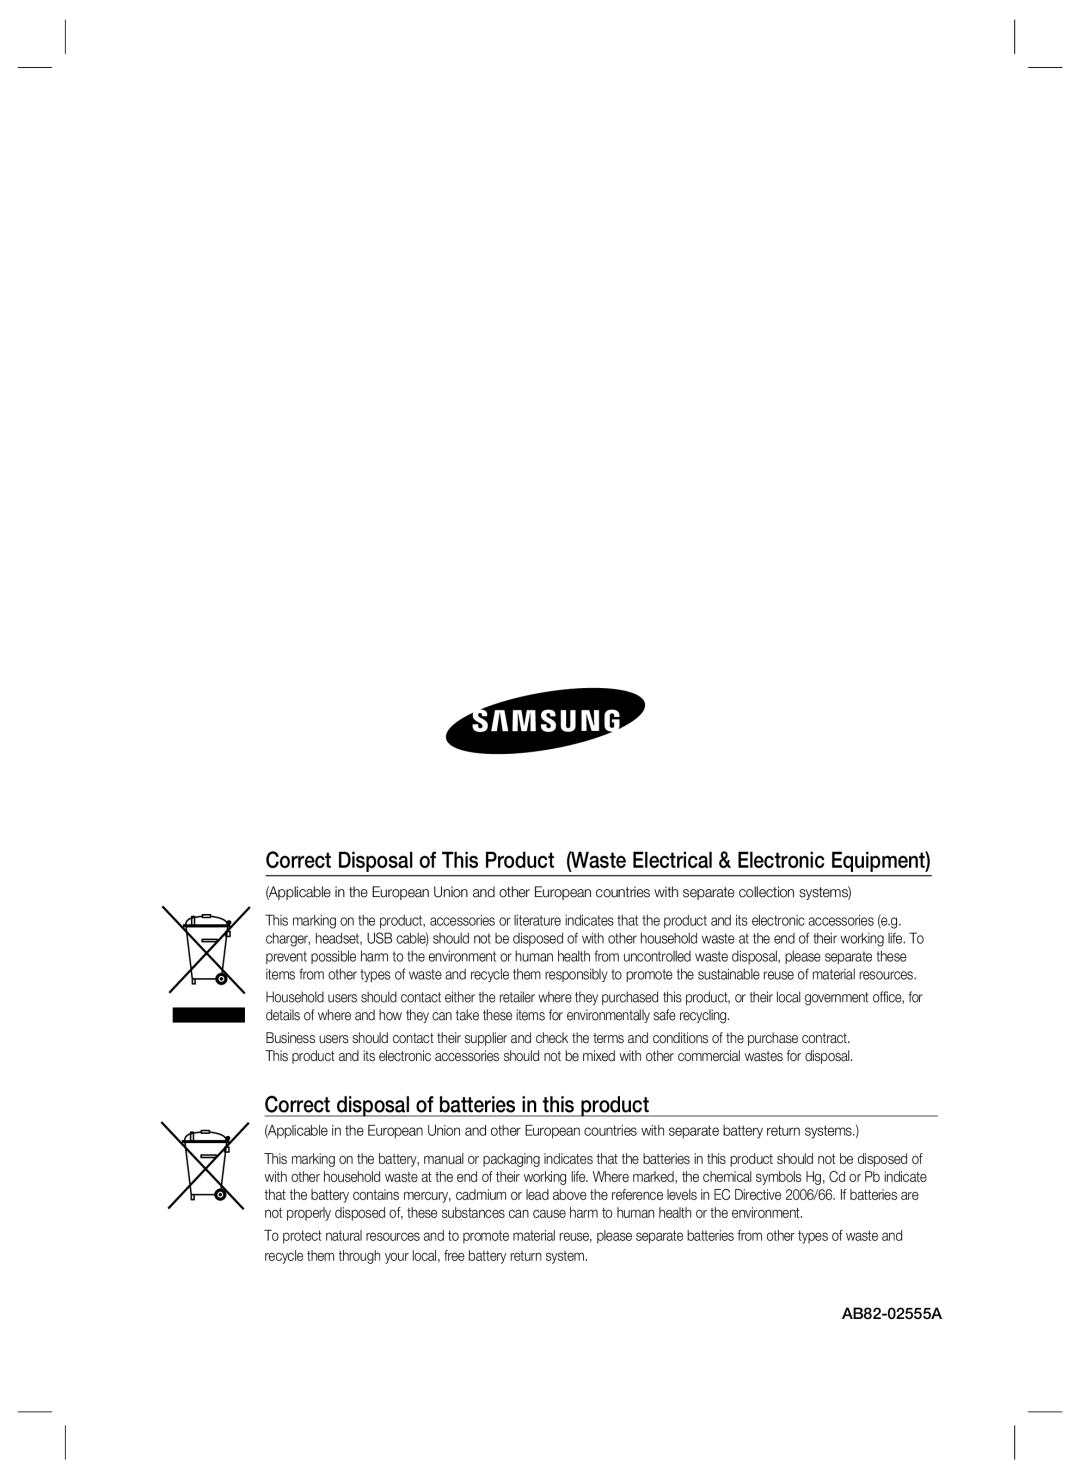 Samsung SSA-S2000W user manual Correct disposal of batteries in this product 